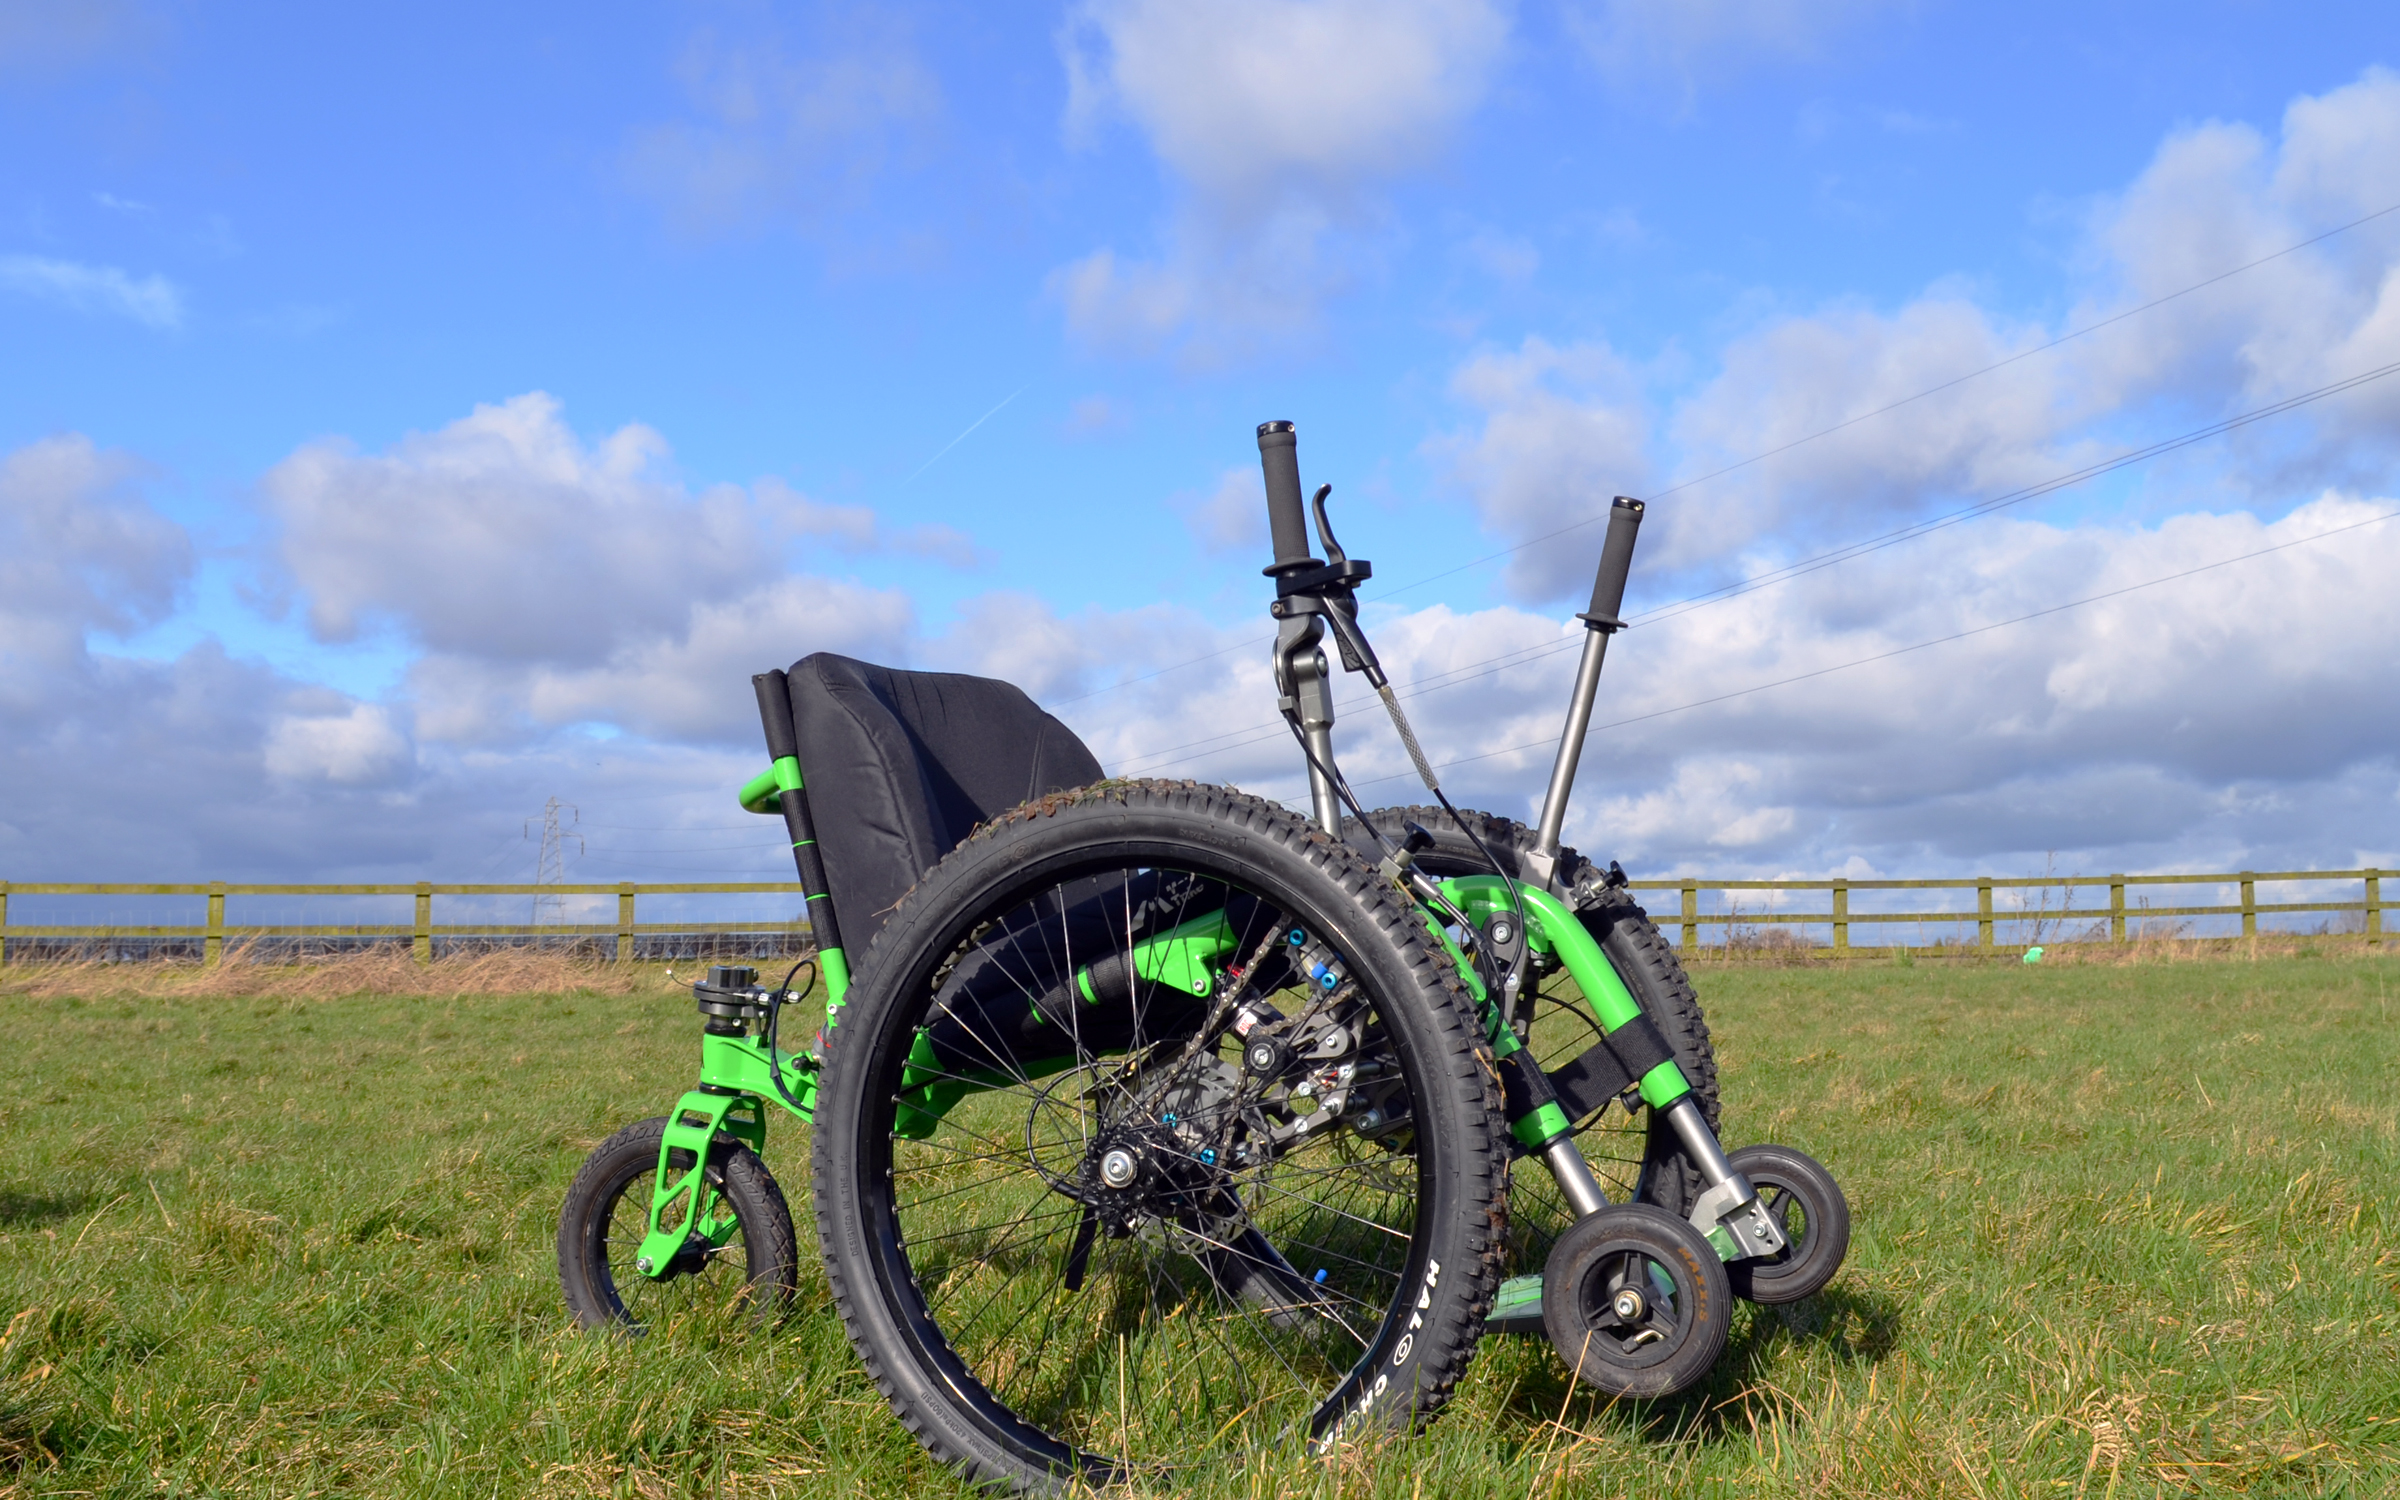 10 years of growth and development for UK all terrain wheelchair mobility company